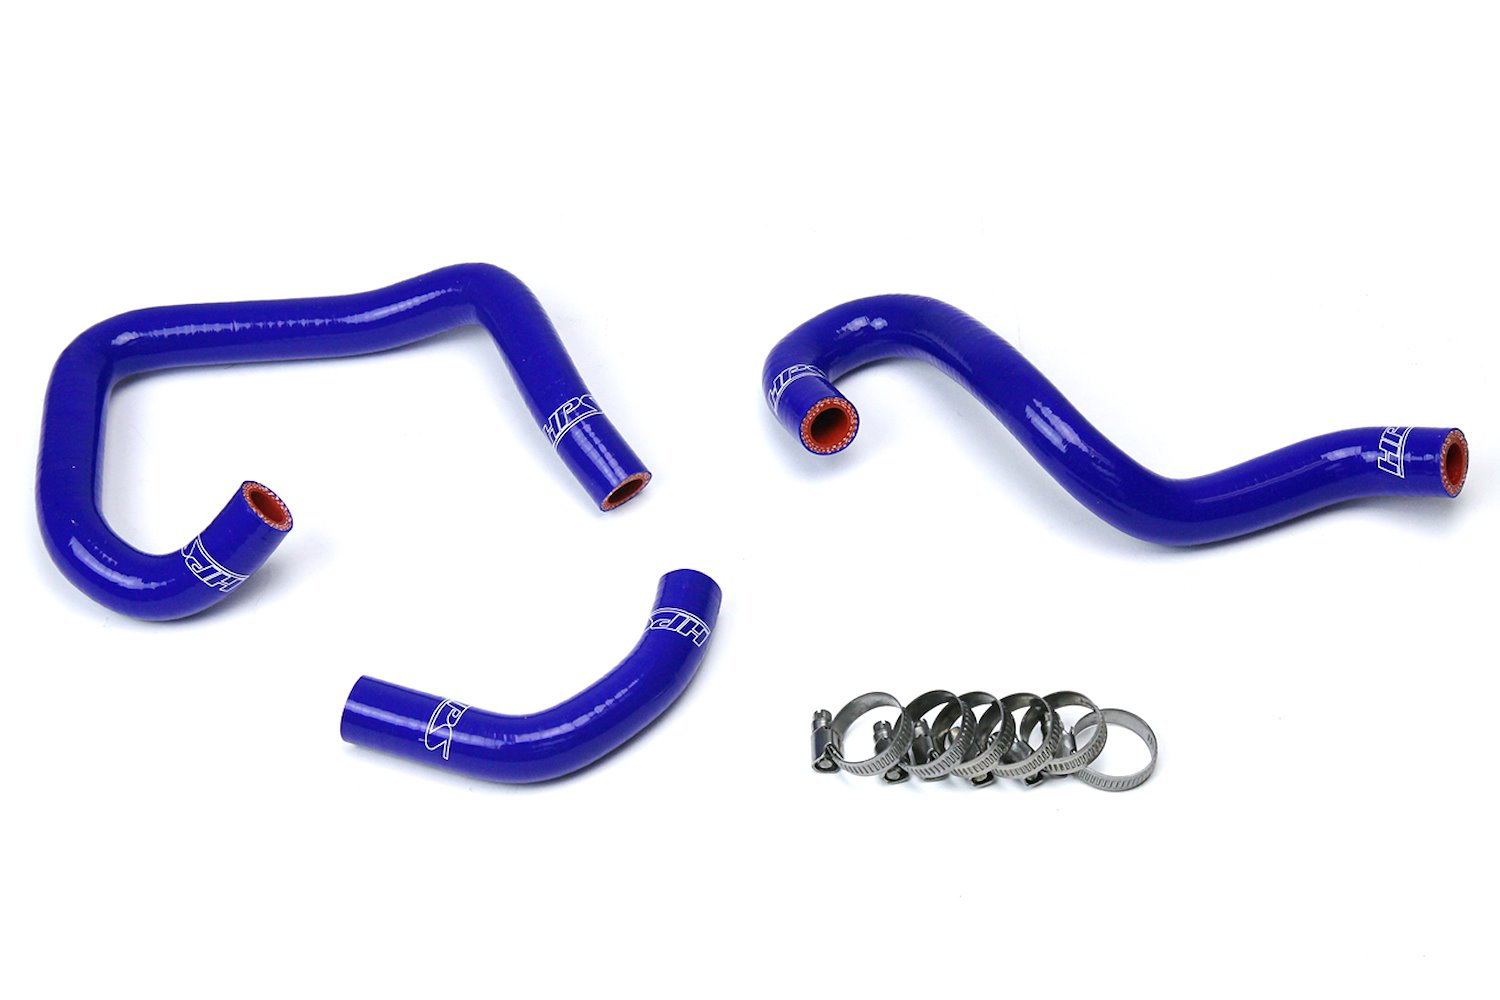 57-1521-BLUE Heater Hose Kit, High-Temp 3-Ply Reinforced Silicone, Replace OEM Rubber Heater Coolant Hoses